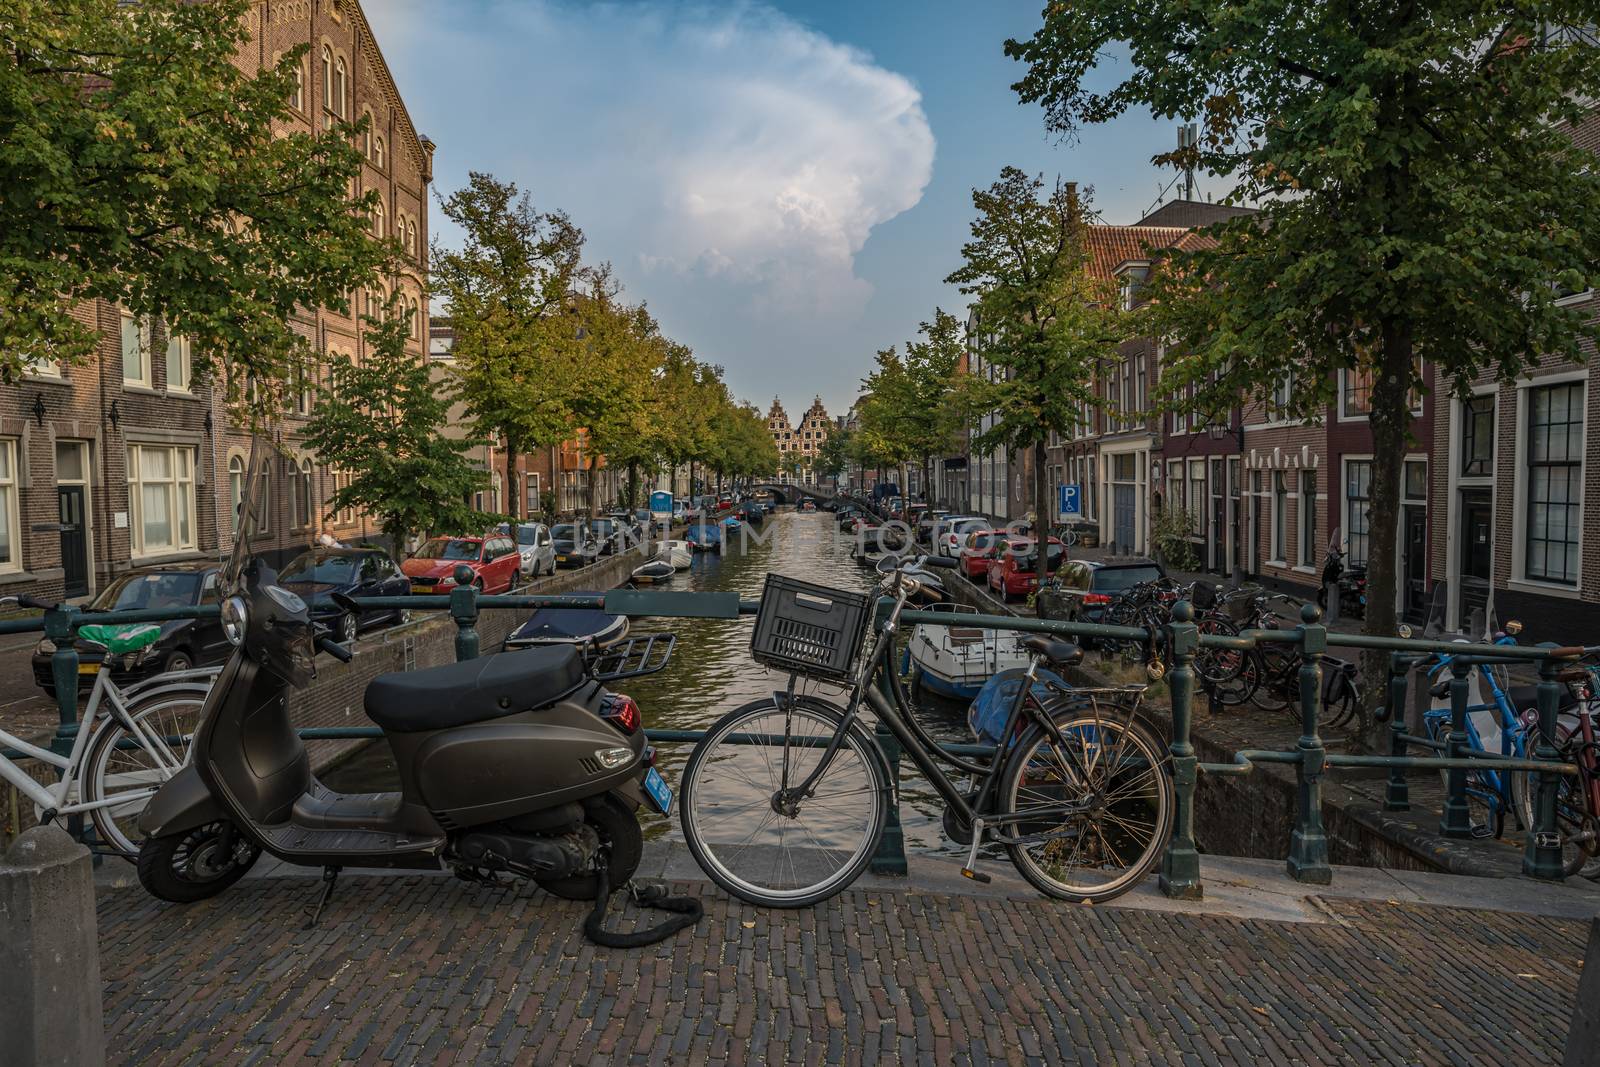 ordinary life in holland Amsterdam during summer by Edophoto